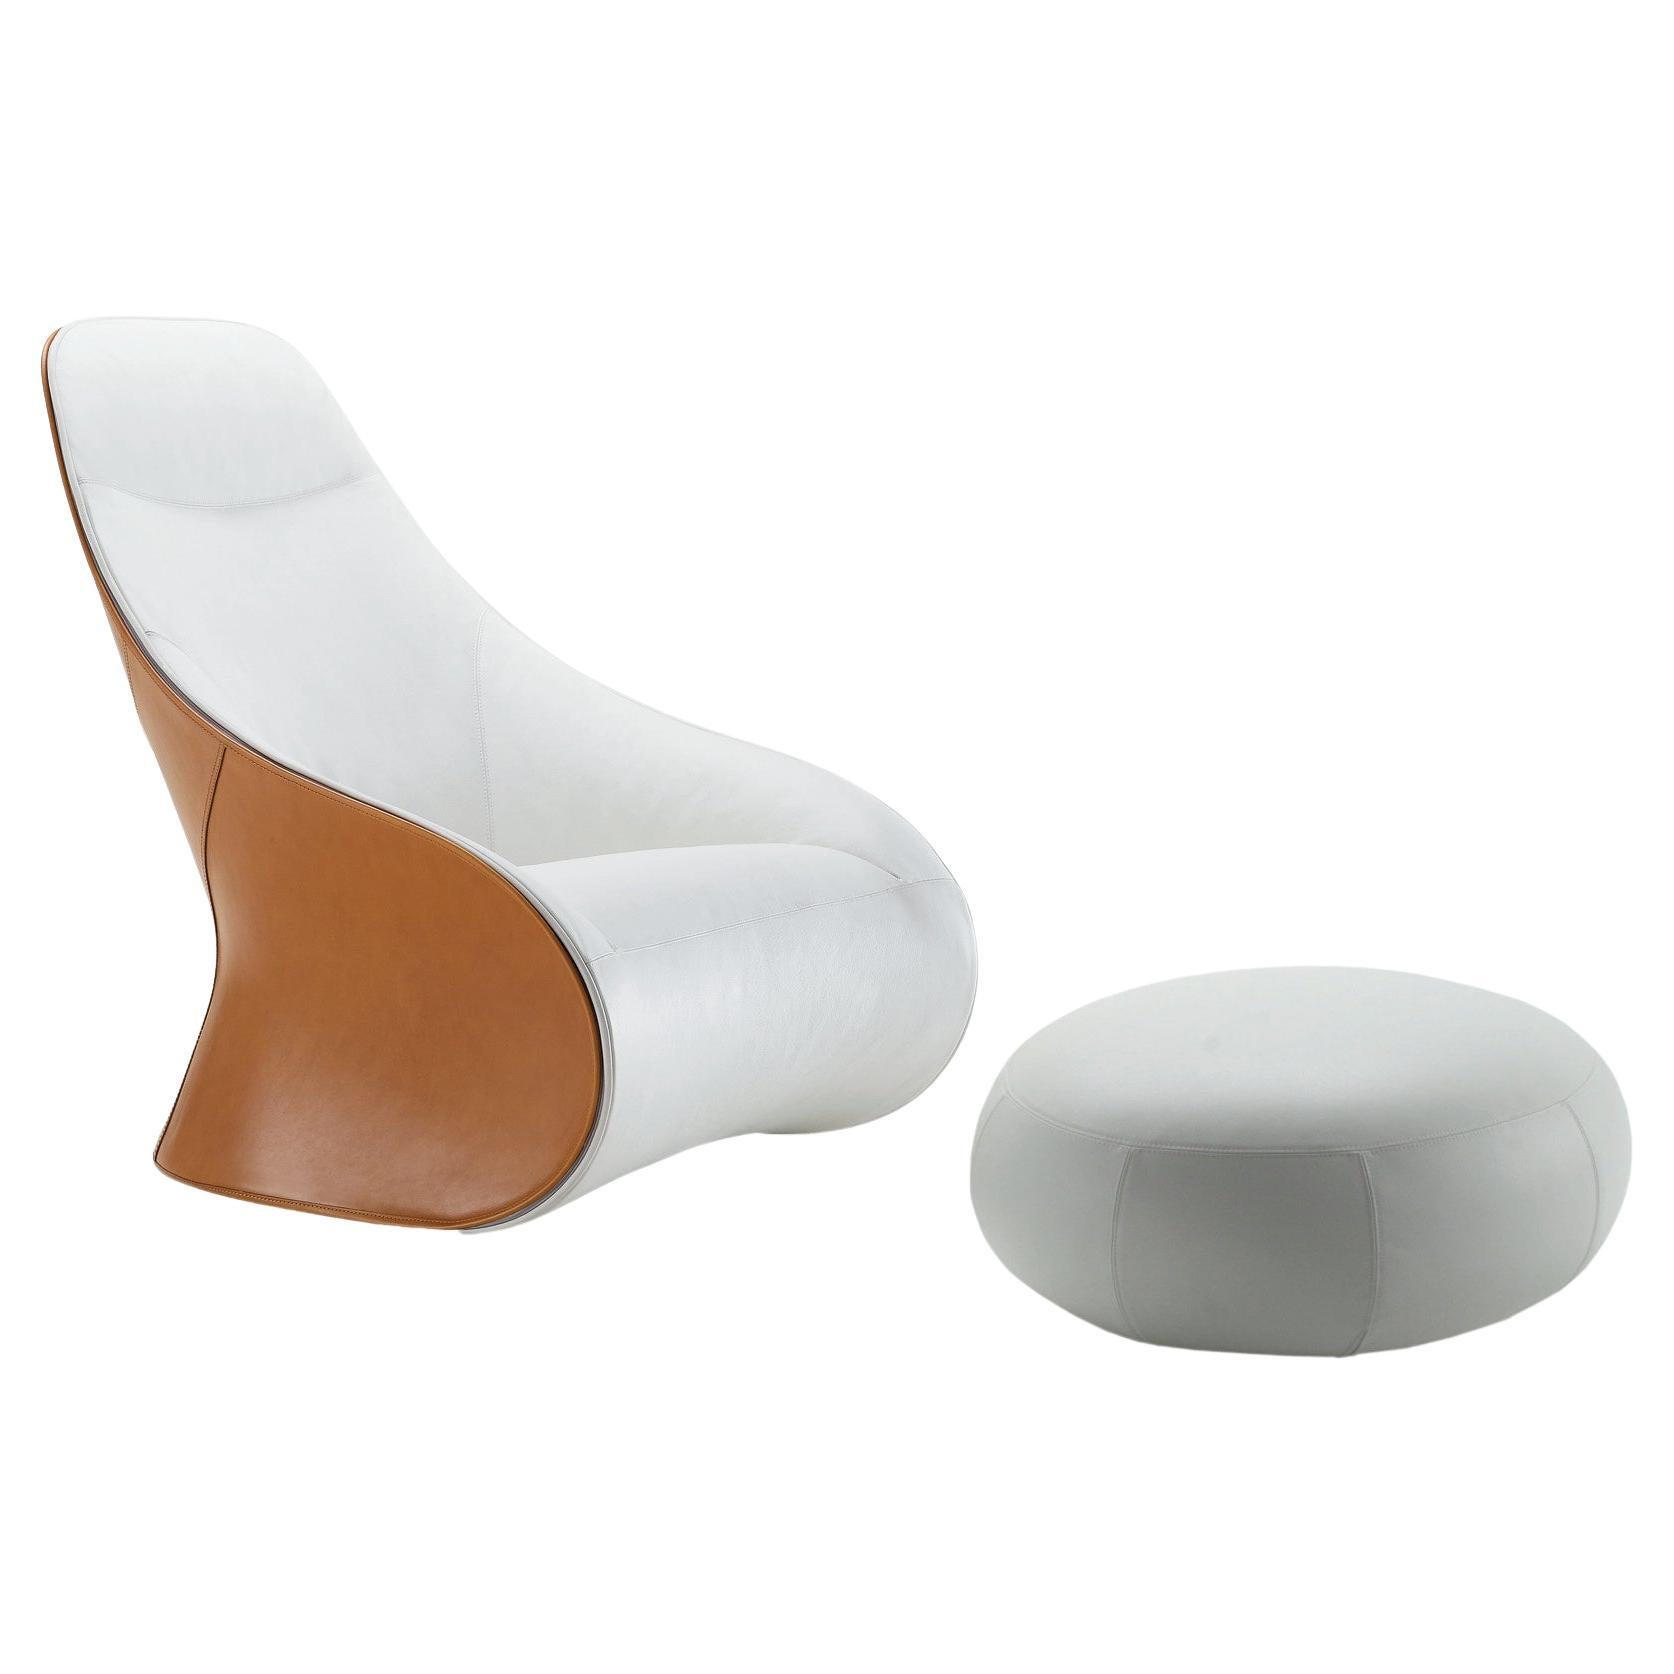 Zanotta Derby Armchair with Pouf in White Upholstery by Noé Duchaufour Lawrance For Sale